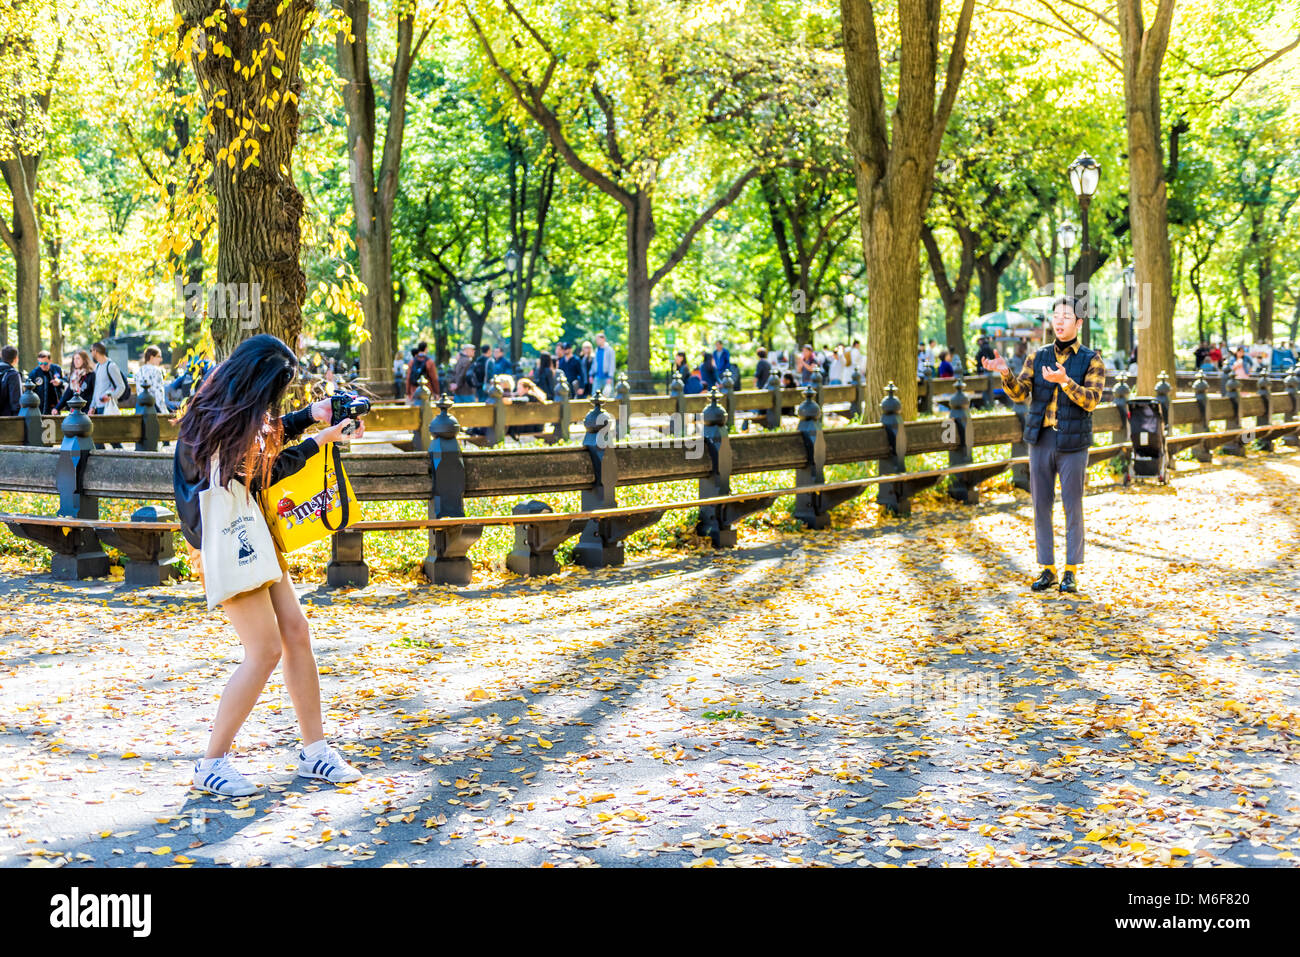 New York City, USA - October 28, 2017: Manhattan NYC Central park with people standing on road in autumn fall season with fallen leaves on ground, asi Stock Photo